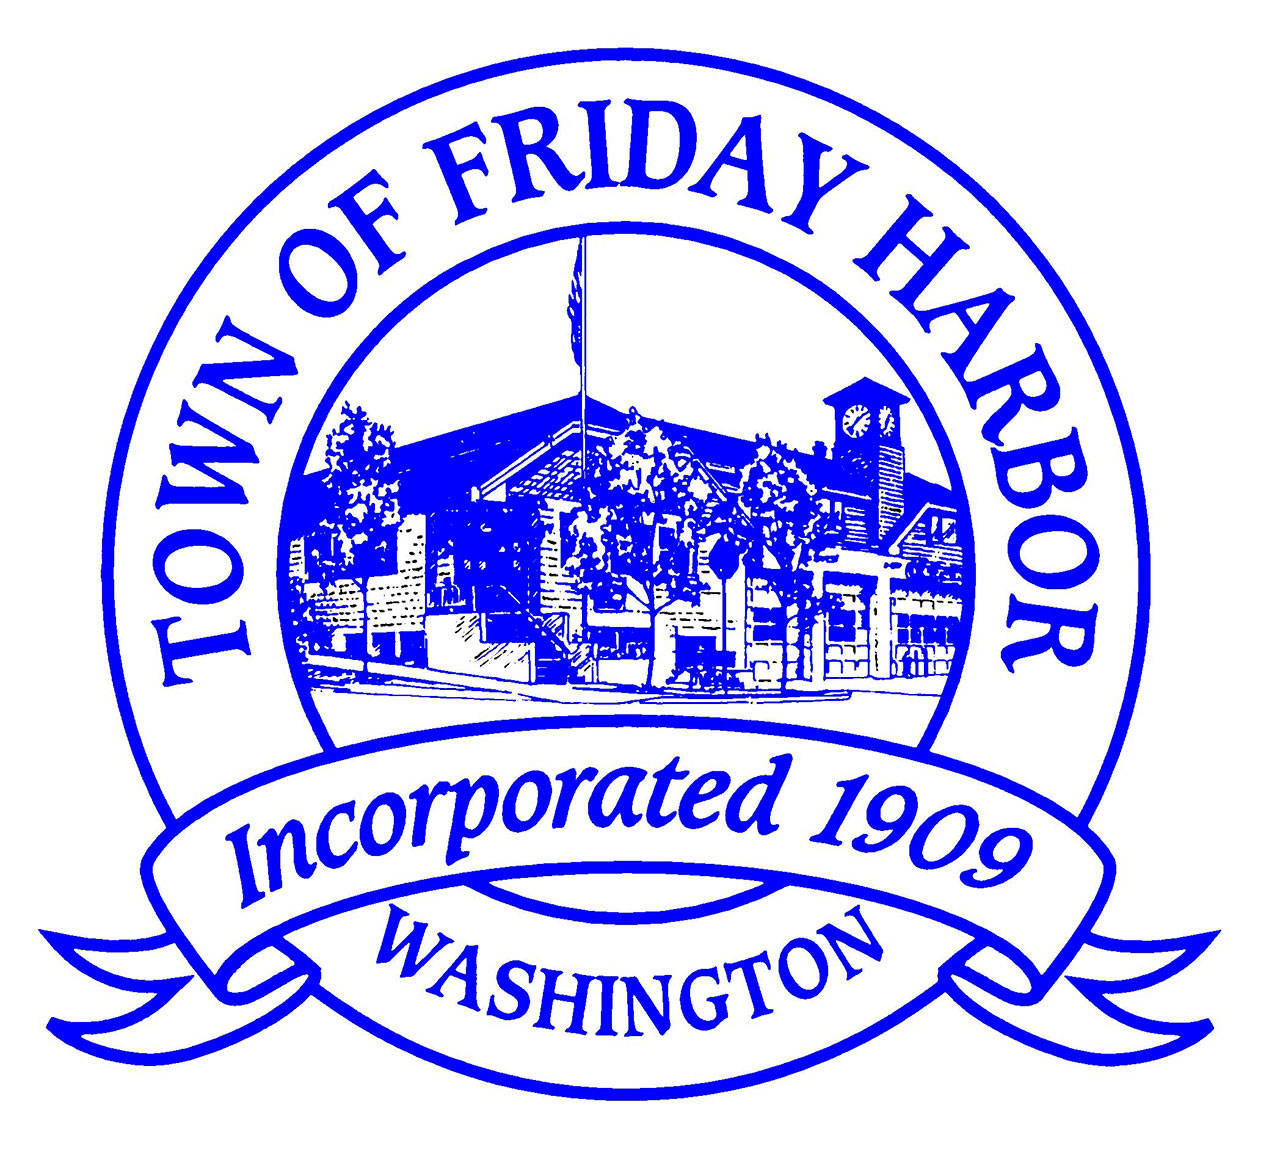 Apply to be on Friday Harbor’s historic preservation board